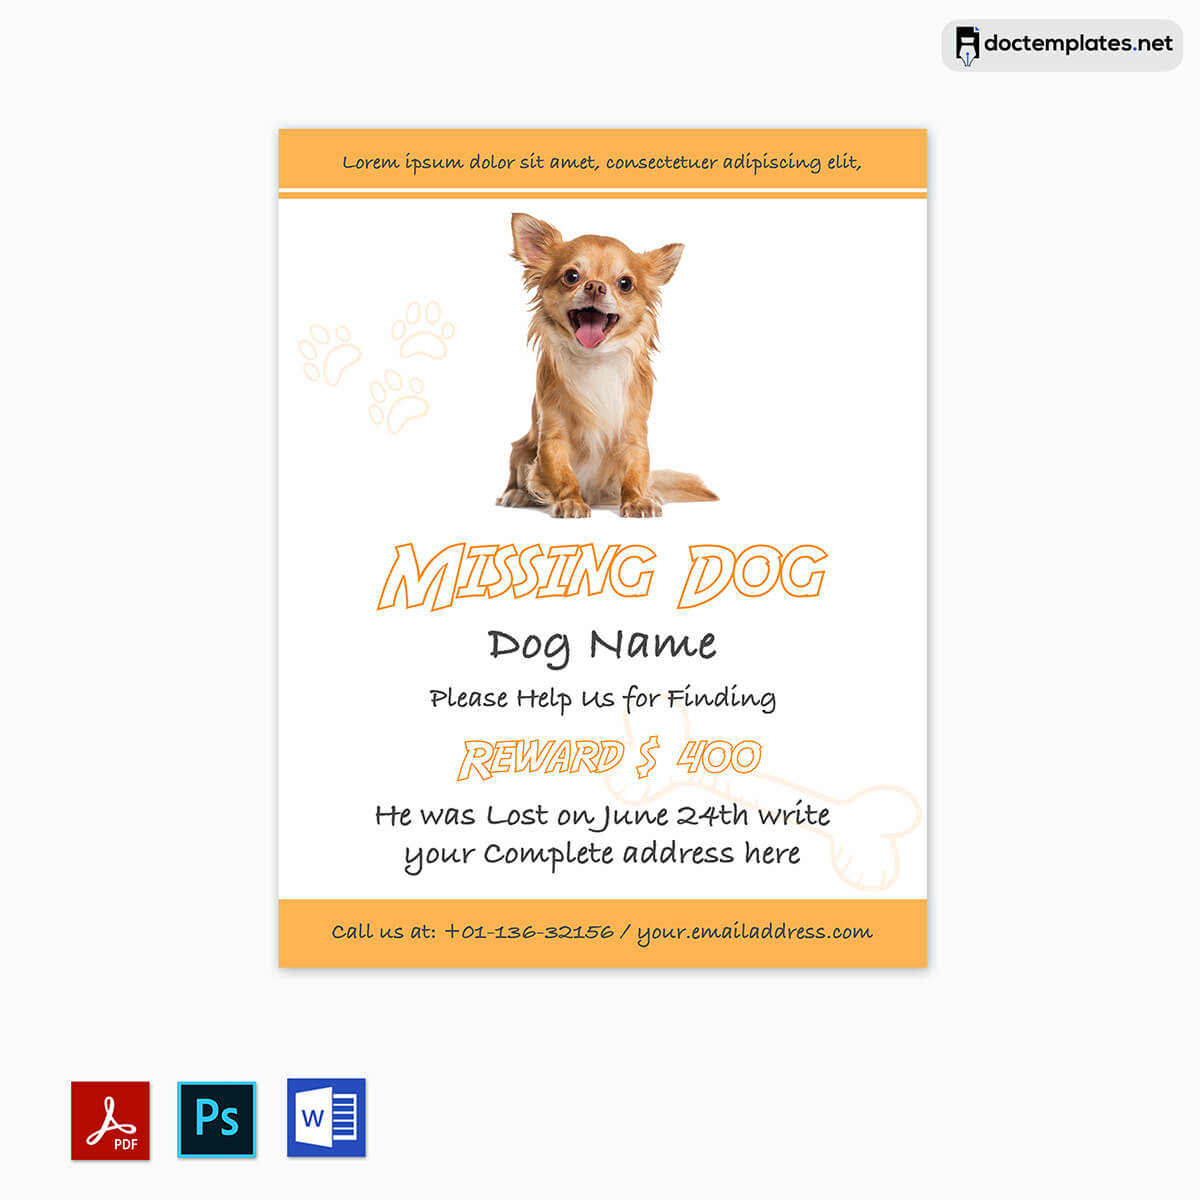 "Word-Based Cat-Dog Flyer" - Create a compelling lost pet flyer in Word with this template for cats and dogs.